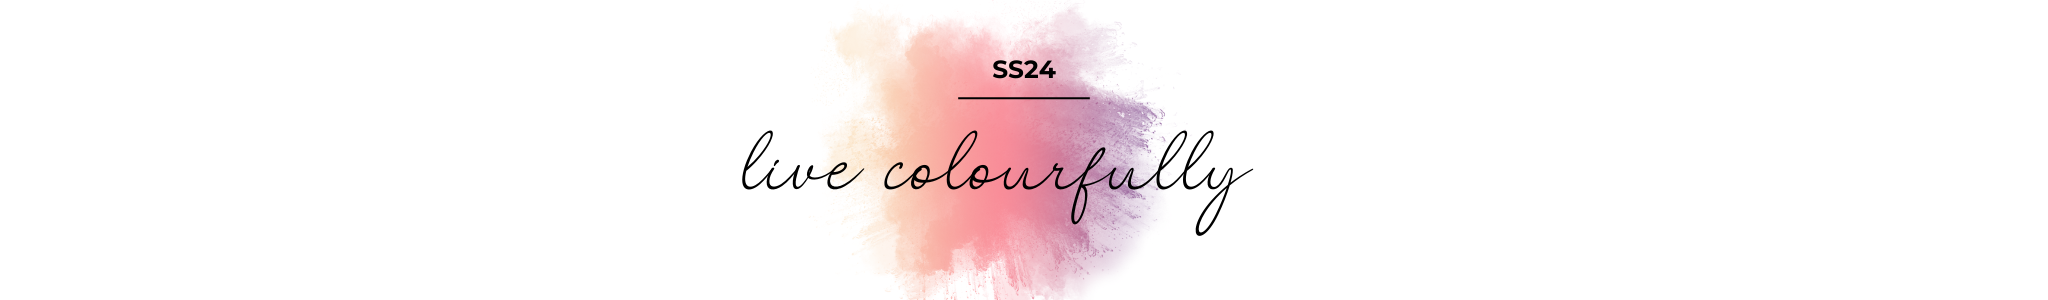 LIVE COLOURFULLY